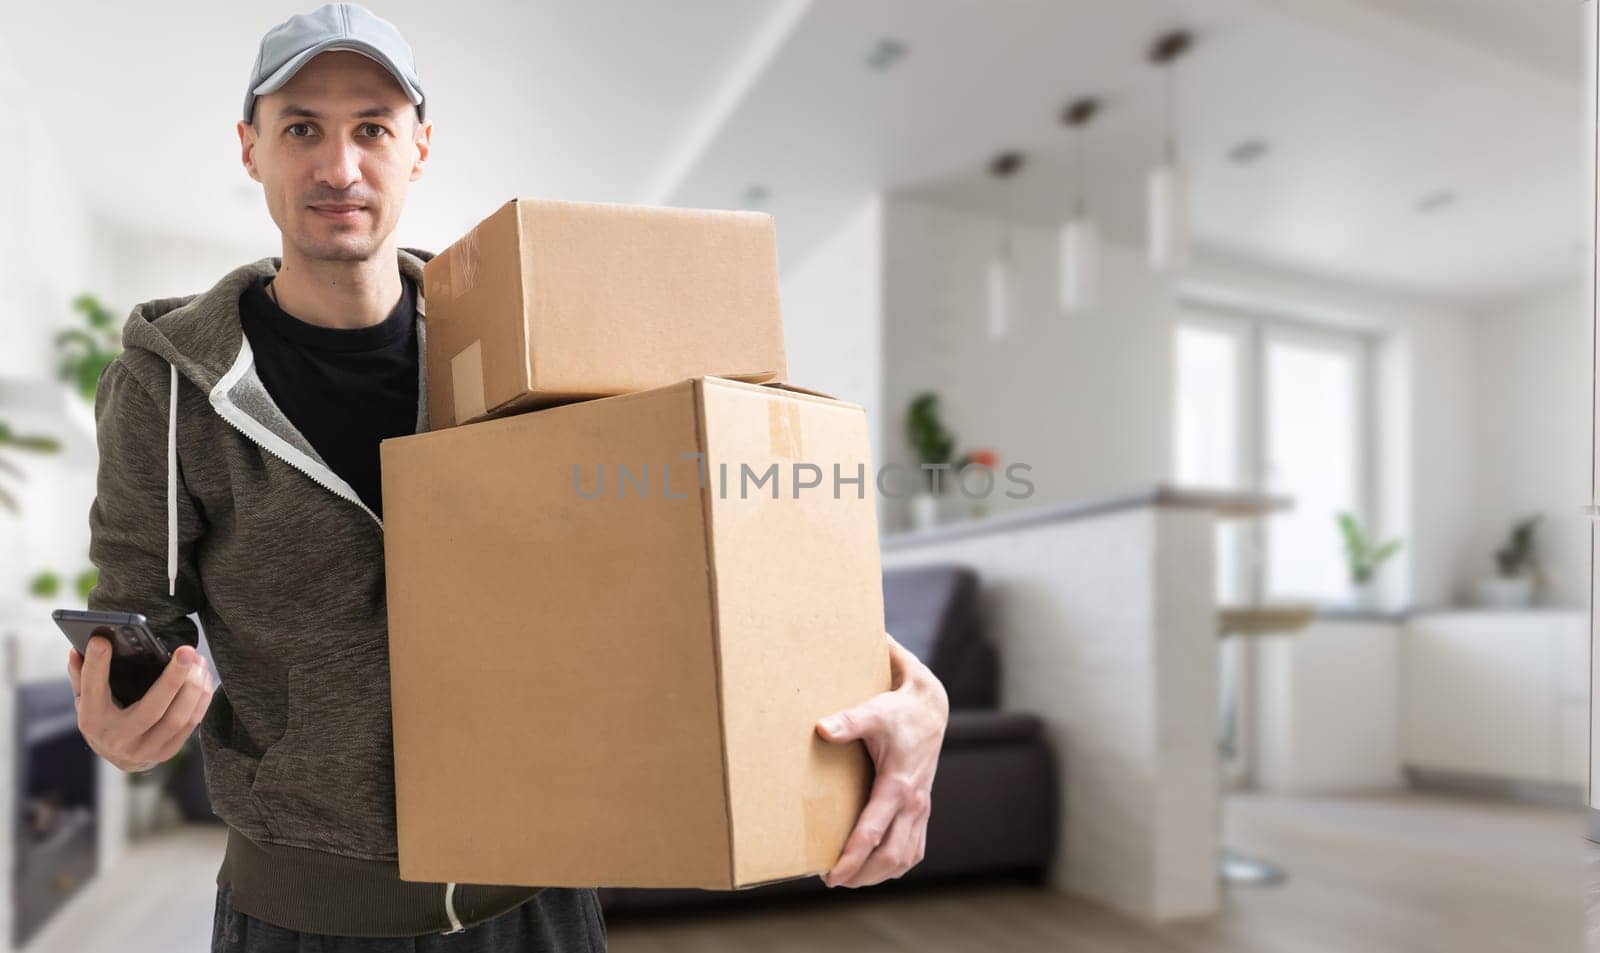 Smiling young delivery man holding and carrying a cardbox.